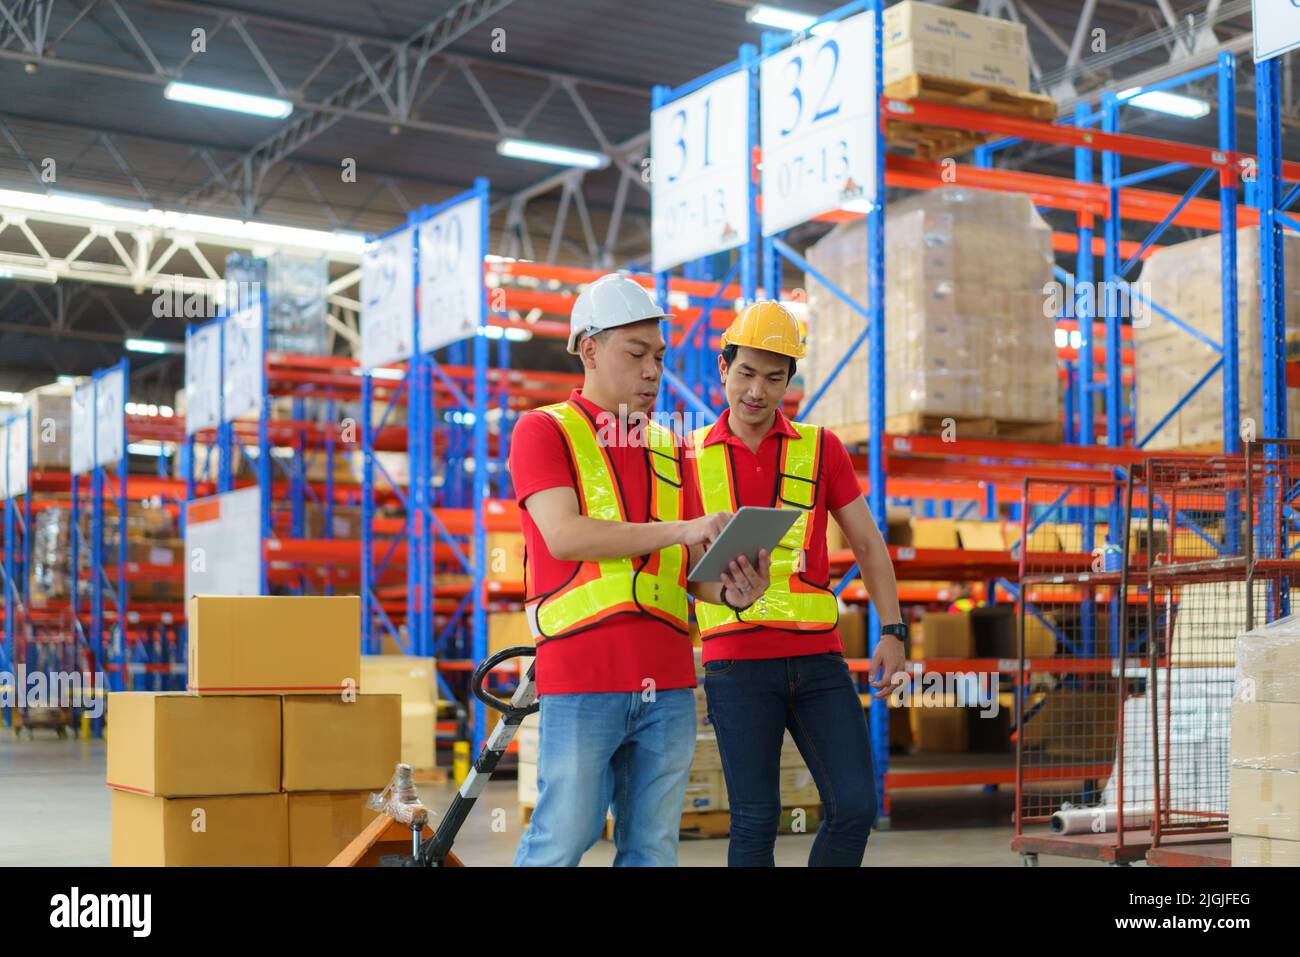 Asian man Warehouse worker talking with his foreman during unloading pallet shipment goods into a truck container, warehouse industry freight, logisti Stock Photo